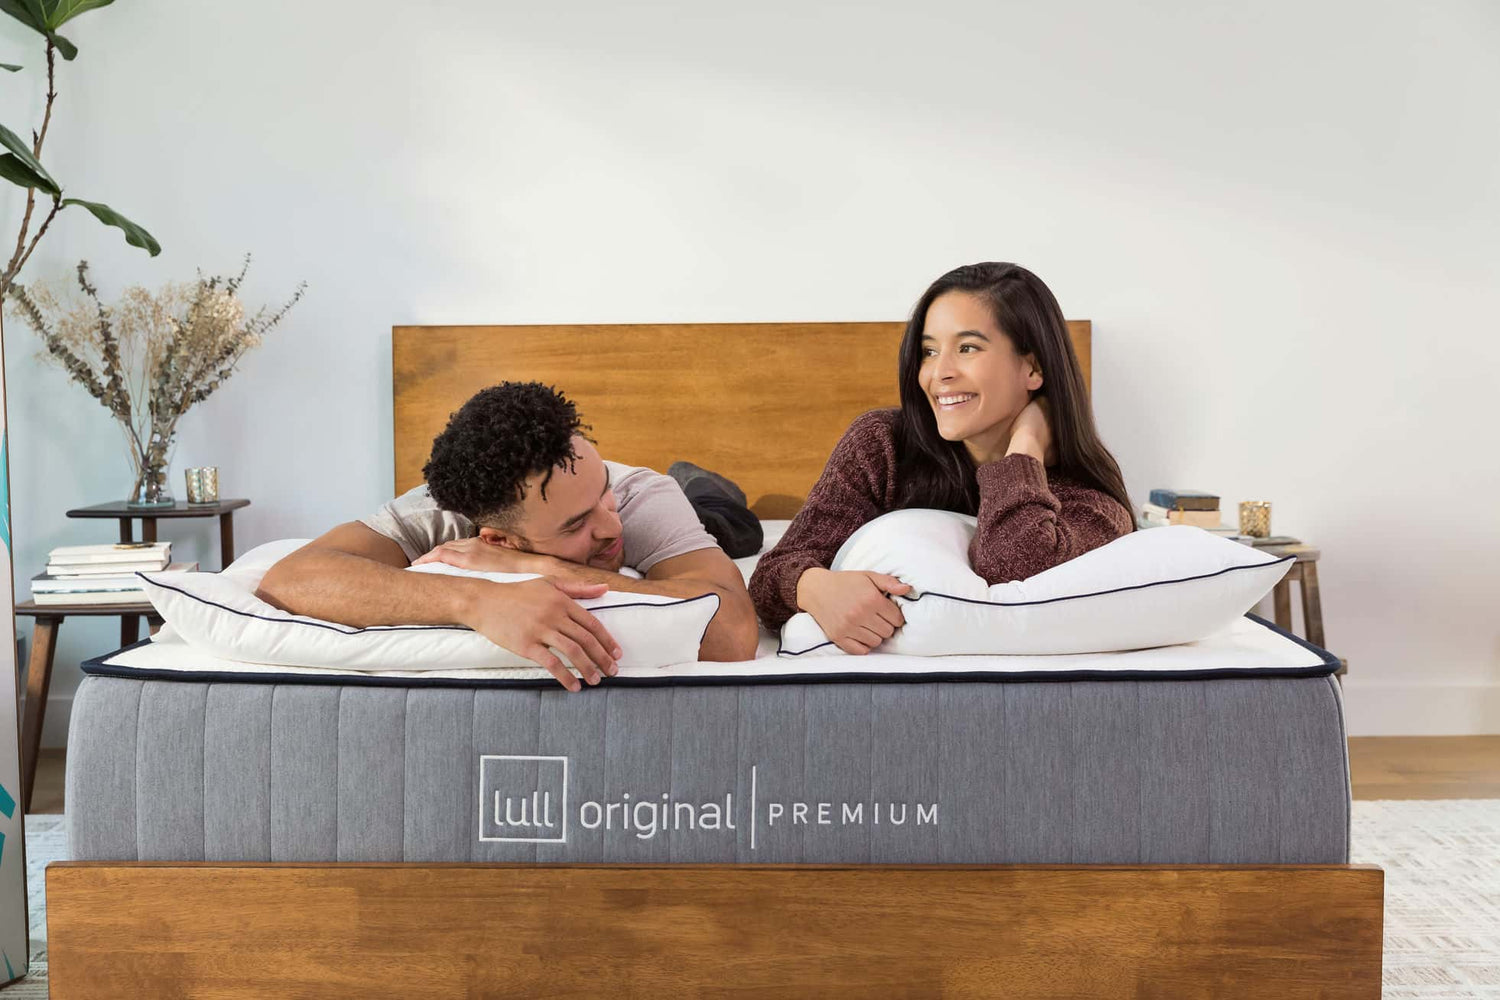 A couple laying comfortably on a lull original premium mattress while smiling at each other.